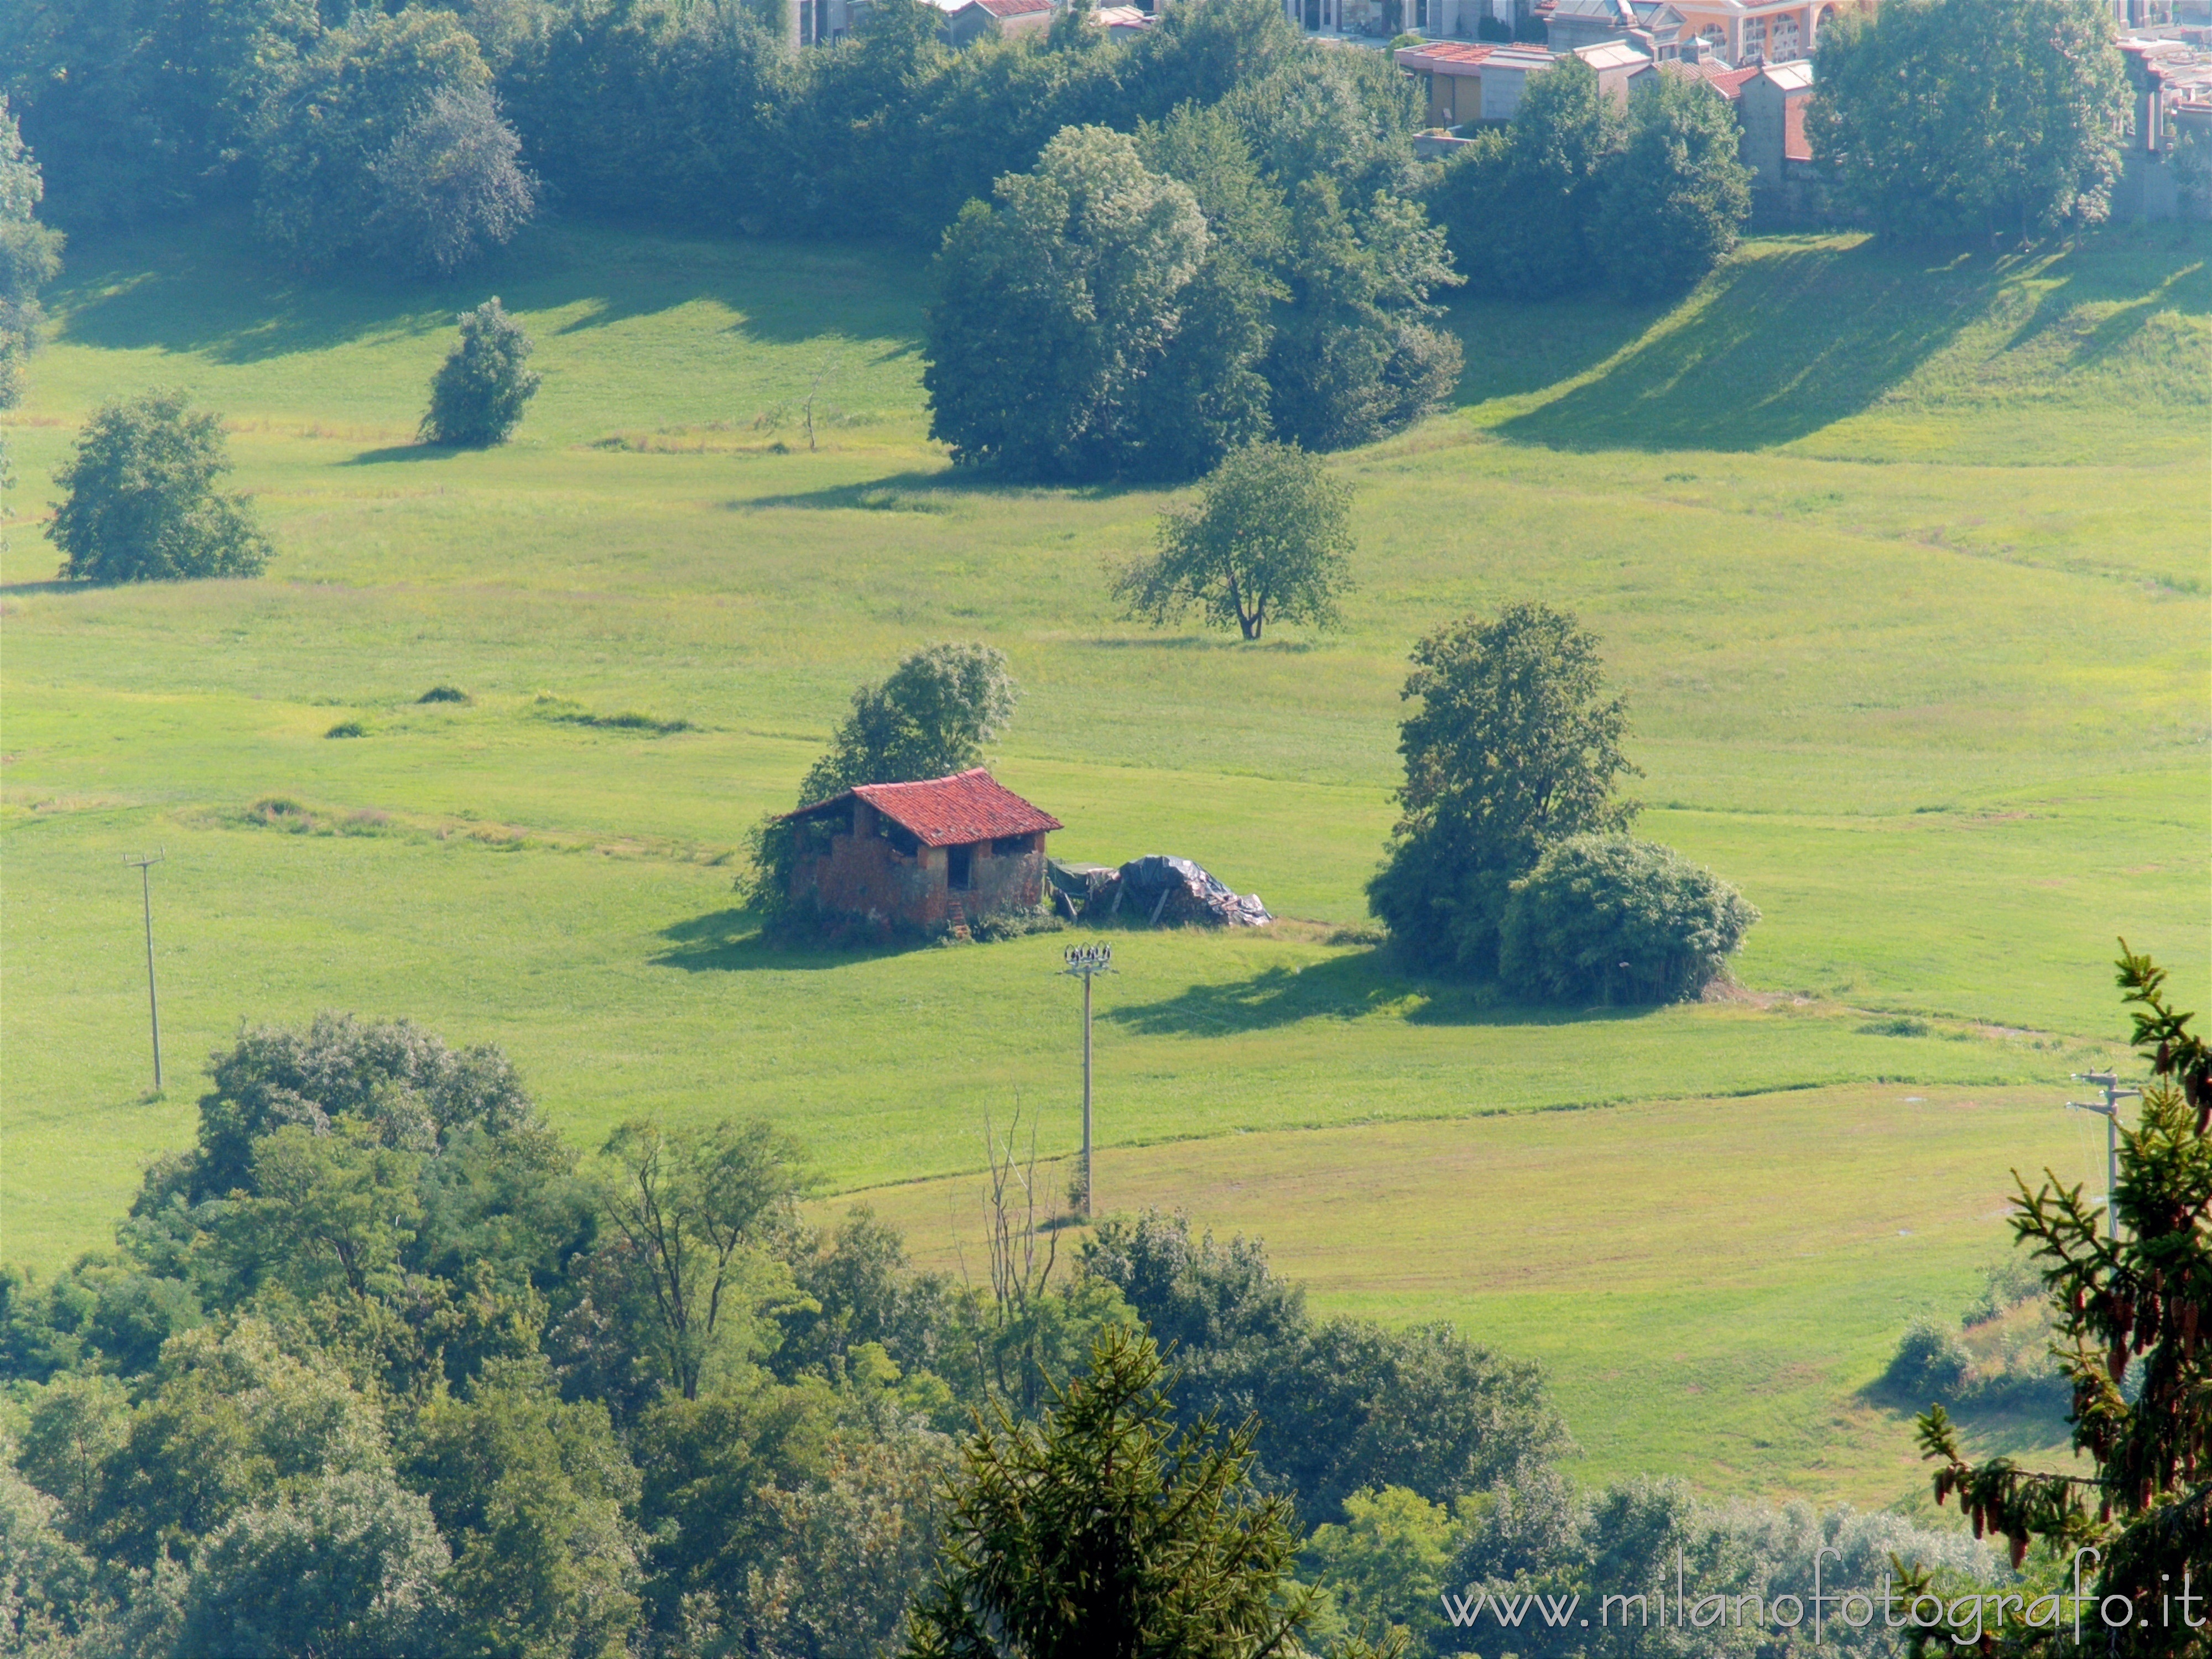 Pollone (Biella, Italy): Lonely hut in the meadows on the slopes of the Burcina Park - Pollone (Biella, Italy)